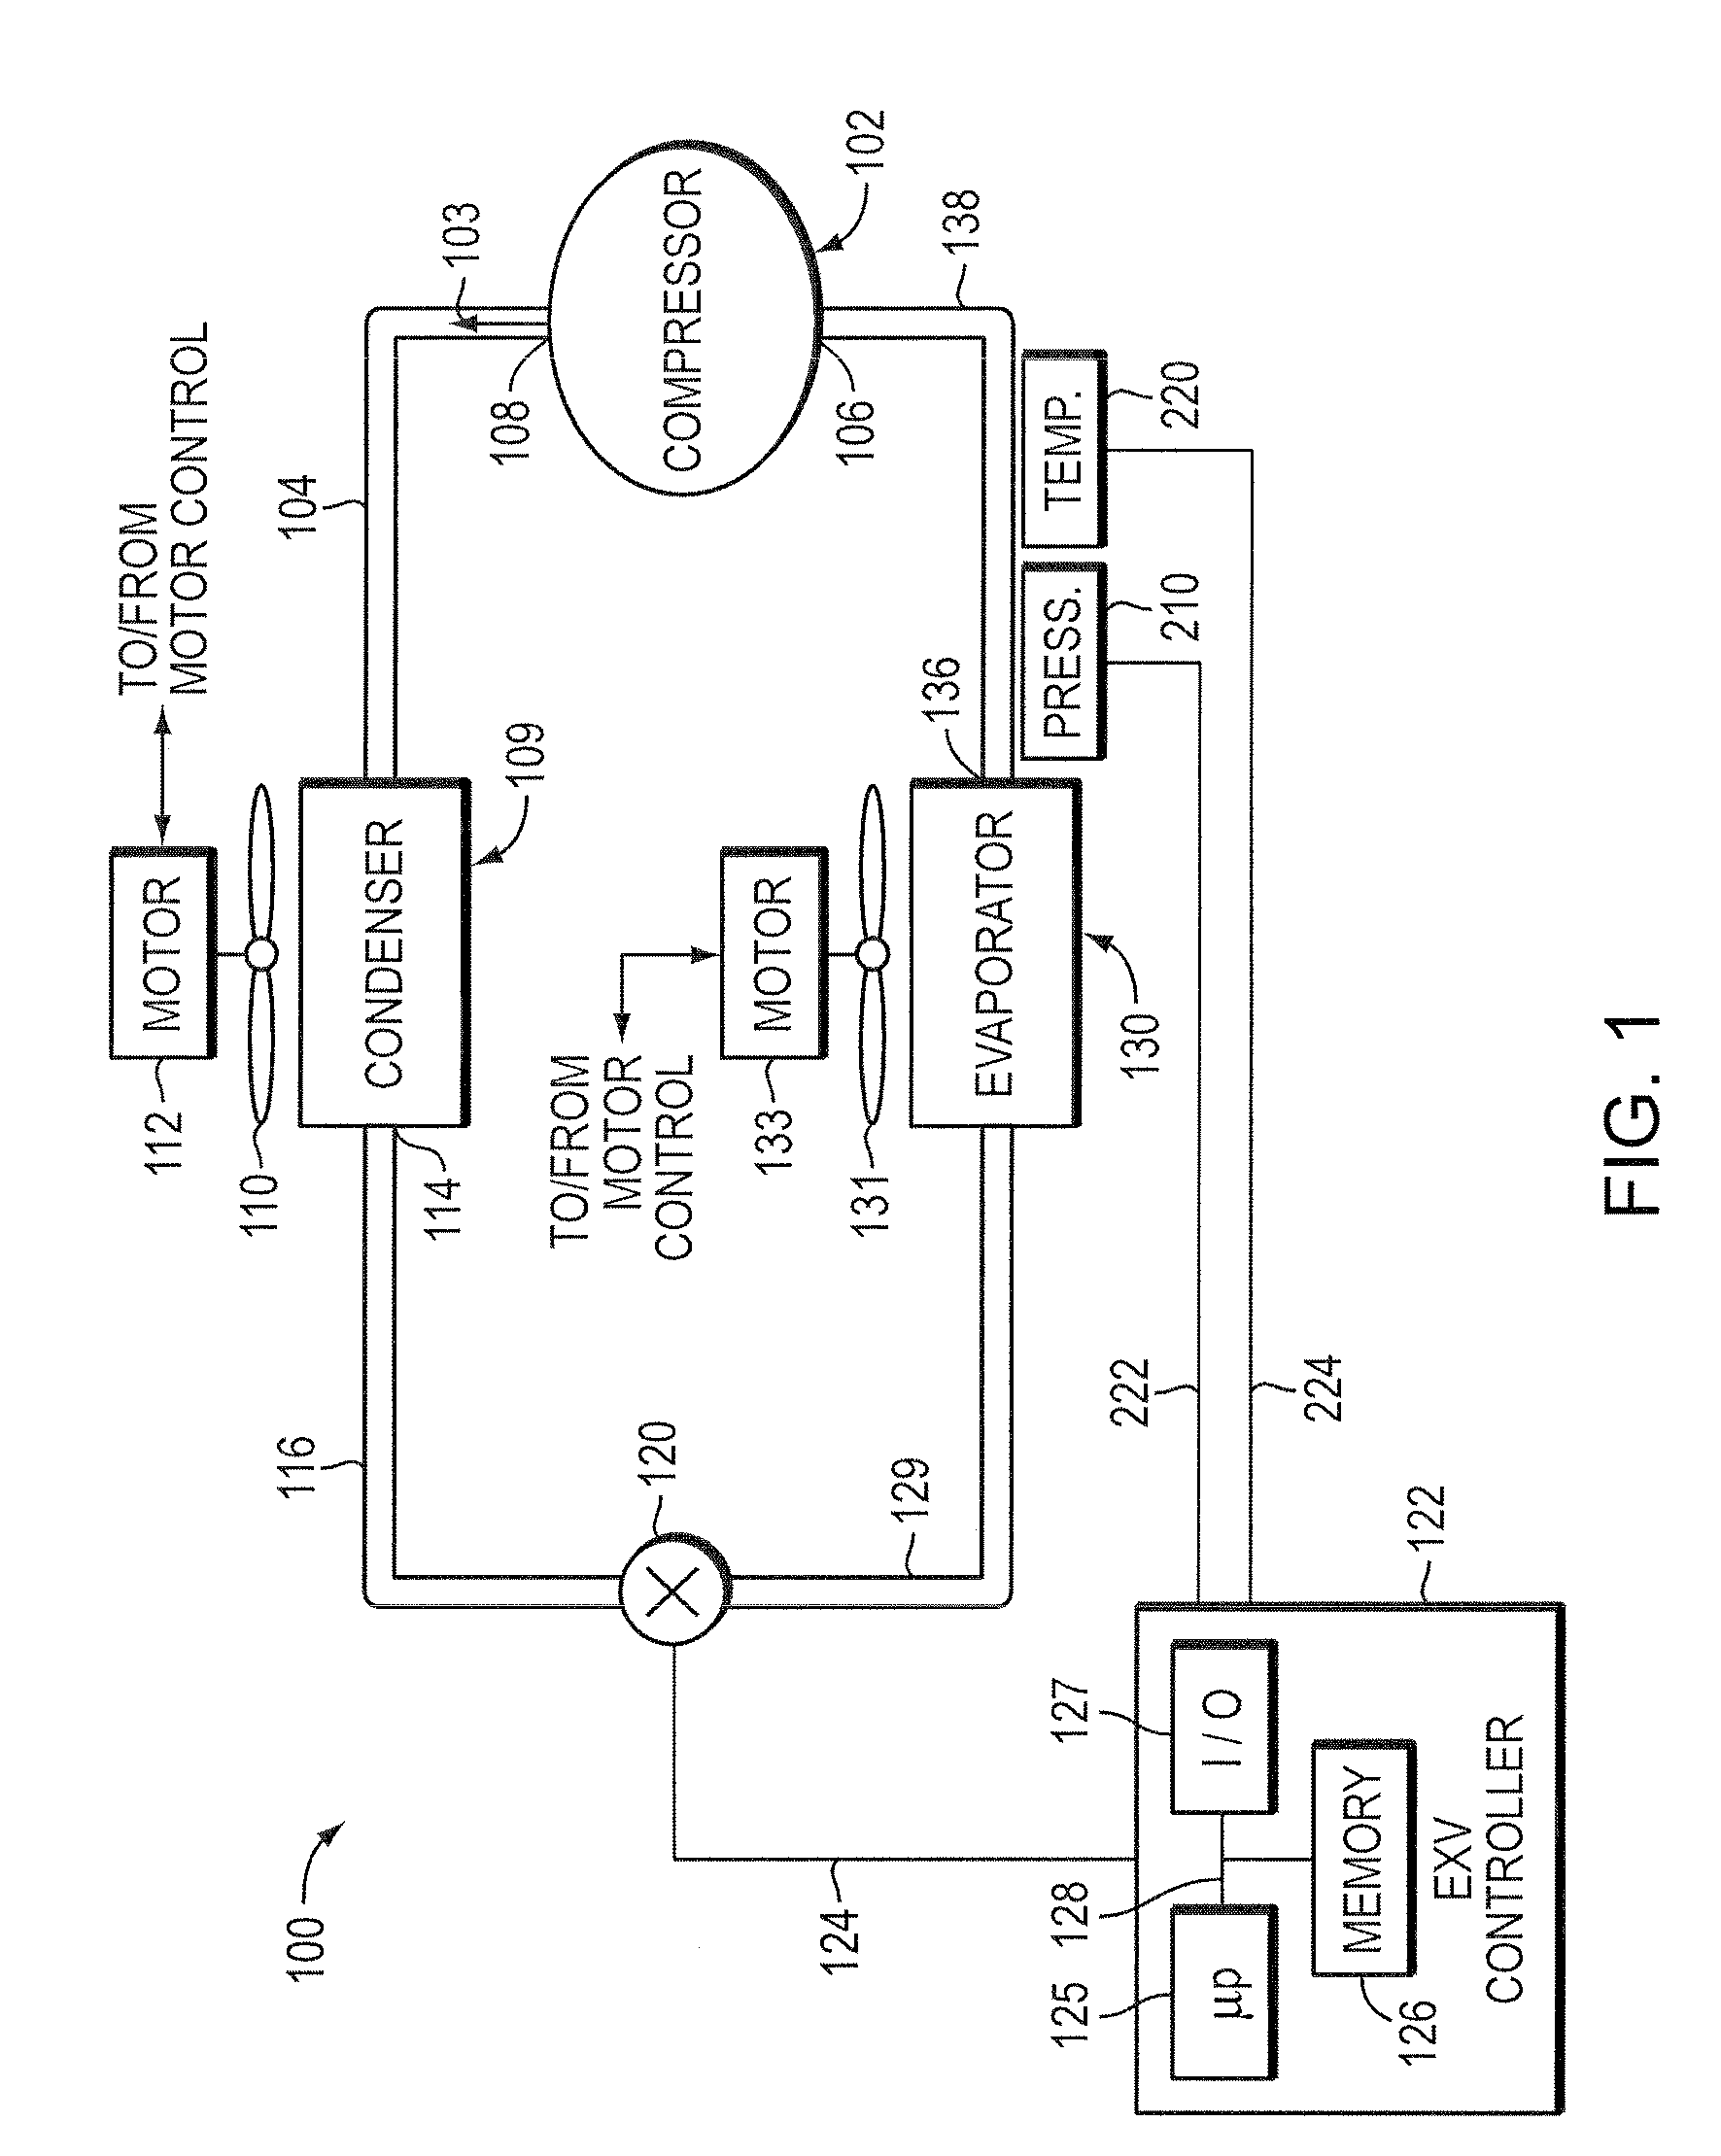 System and method for controlling an air conditioner or heat pump